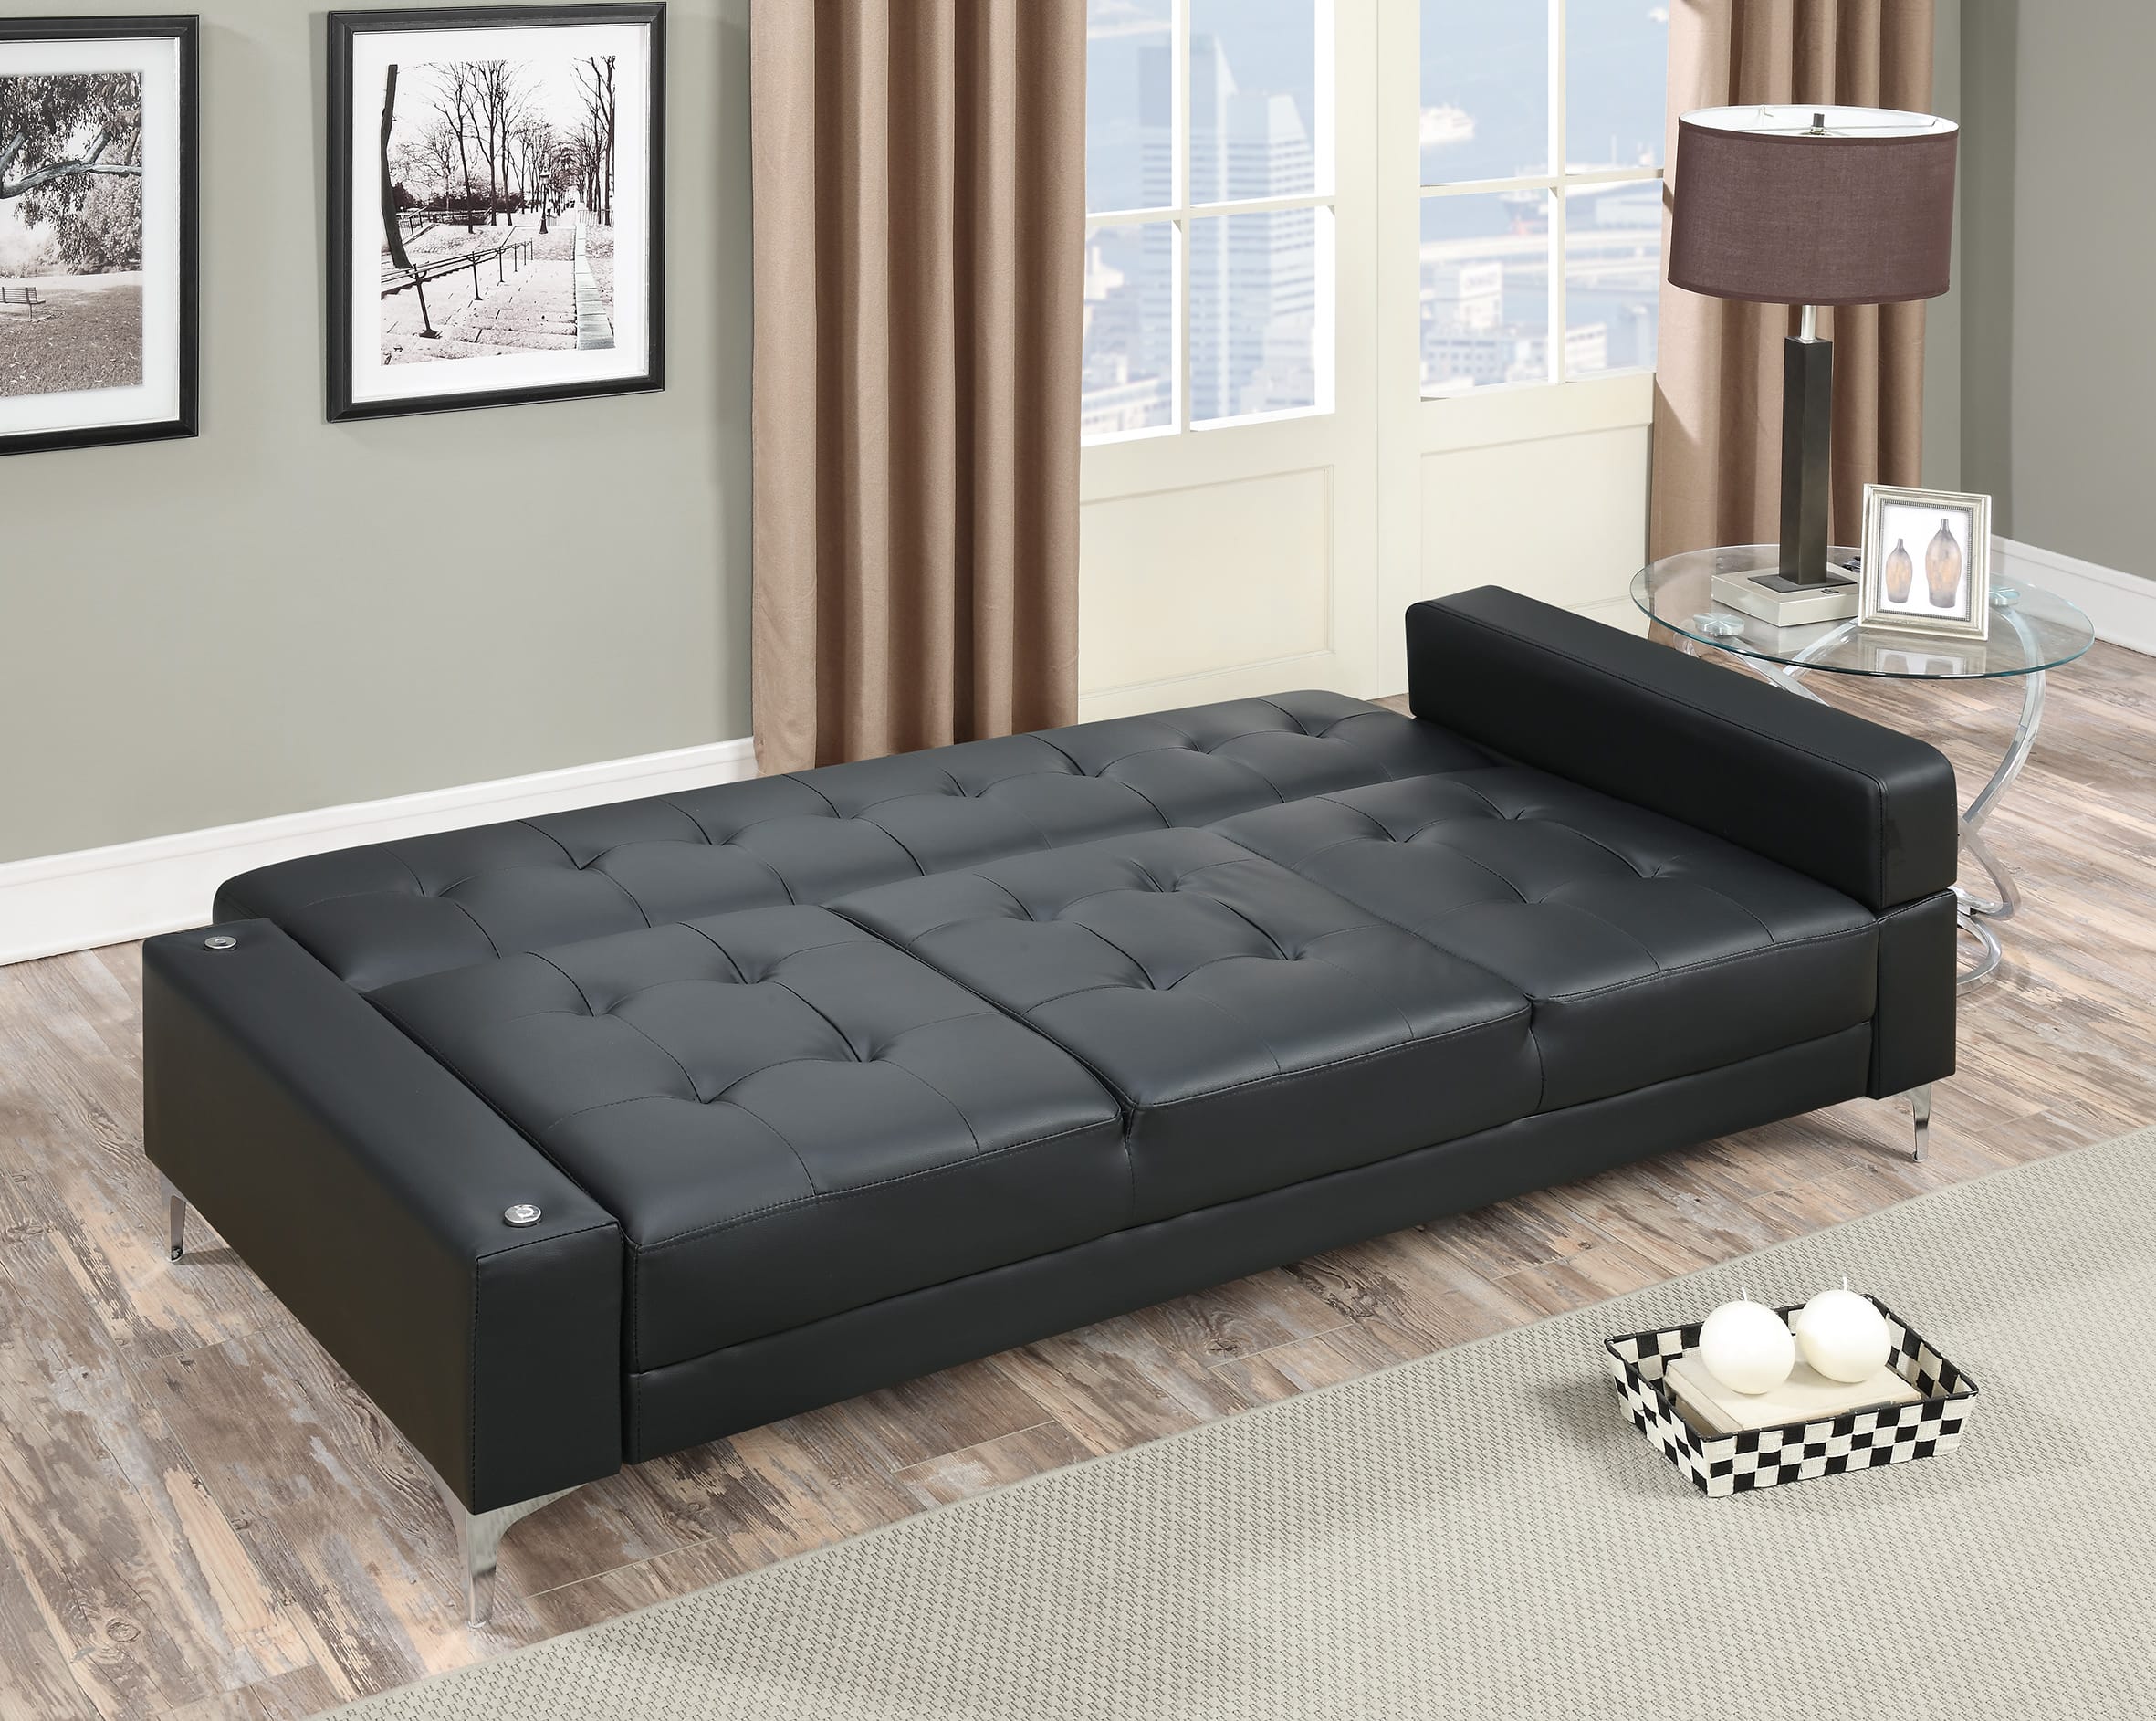 F6830 Black Convertible Sofa Bed by Poundex